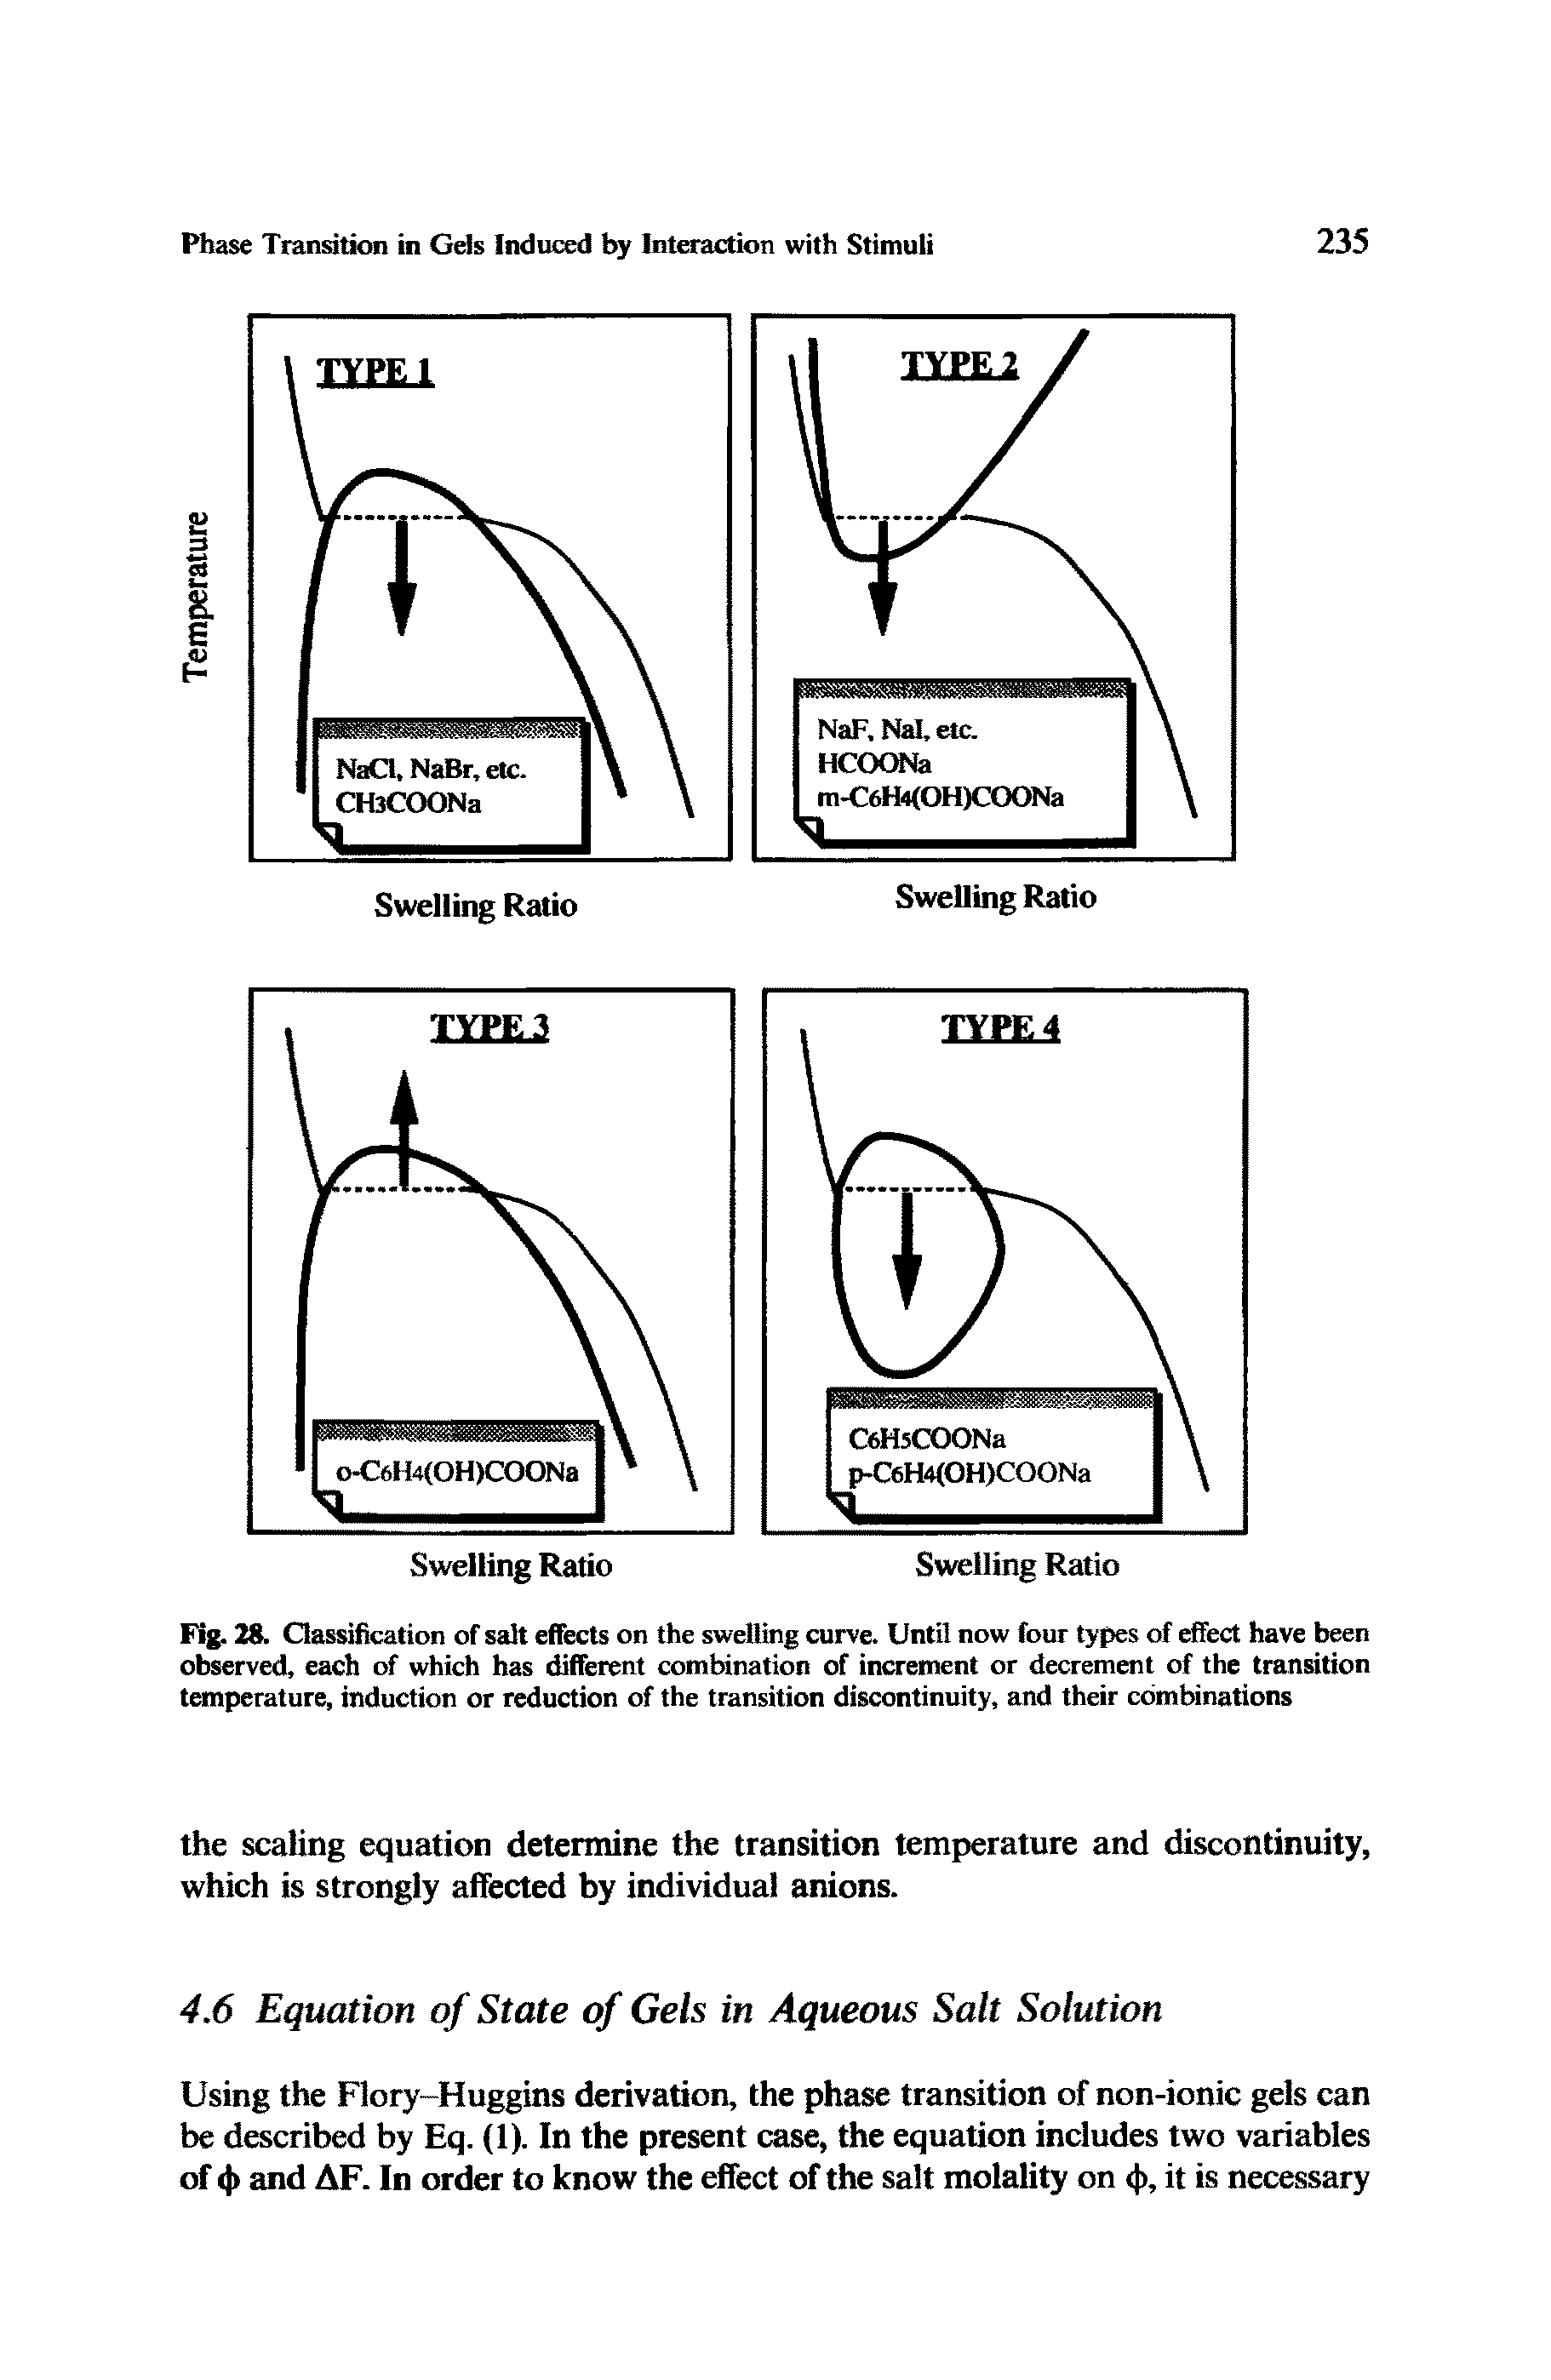 Fig. 28. Classification of salt effects on the swelling curve. Until now four types of effect have been observed, each of which has different combination of increment or decrement of the transition temperature, induction or reduction of the transition discontinuity, and their combinations...